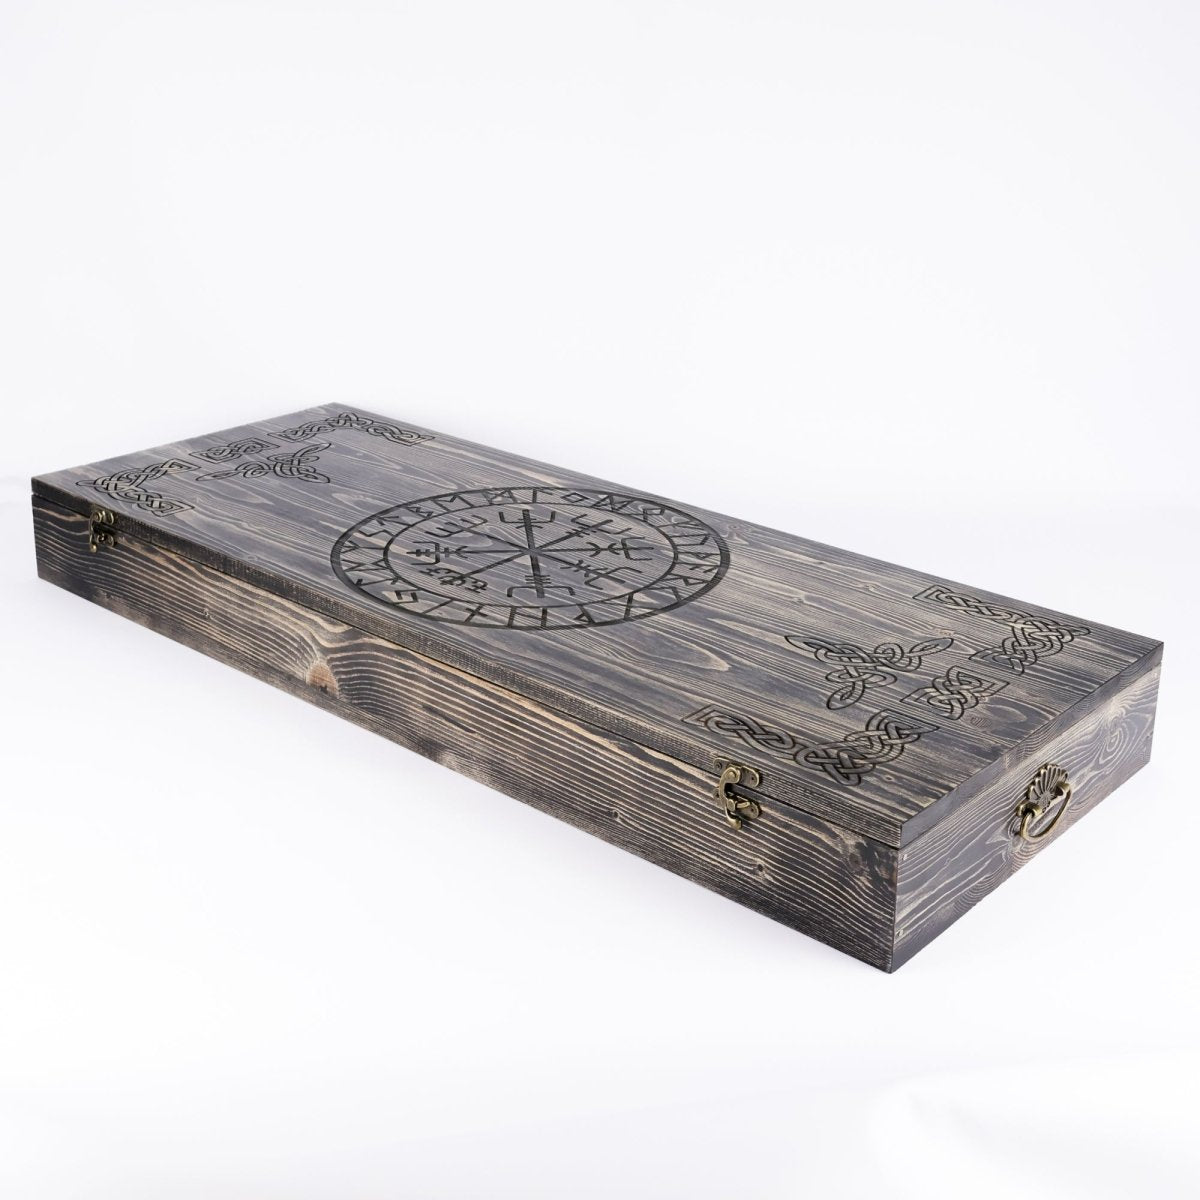 Runic wooden box for standard Leviathan axe from AncientSmithy